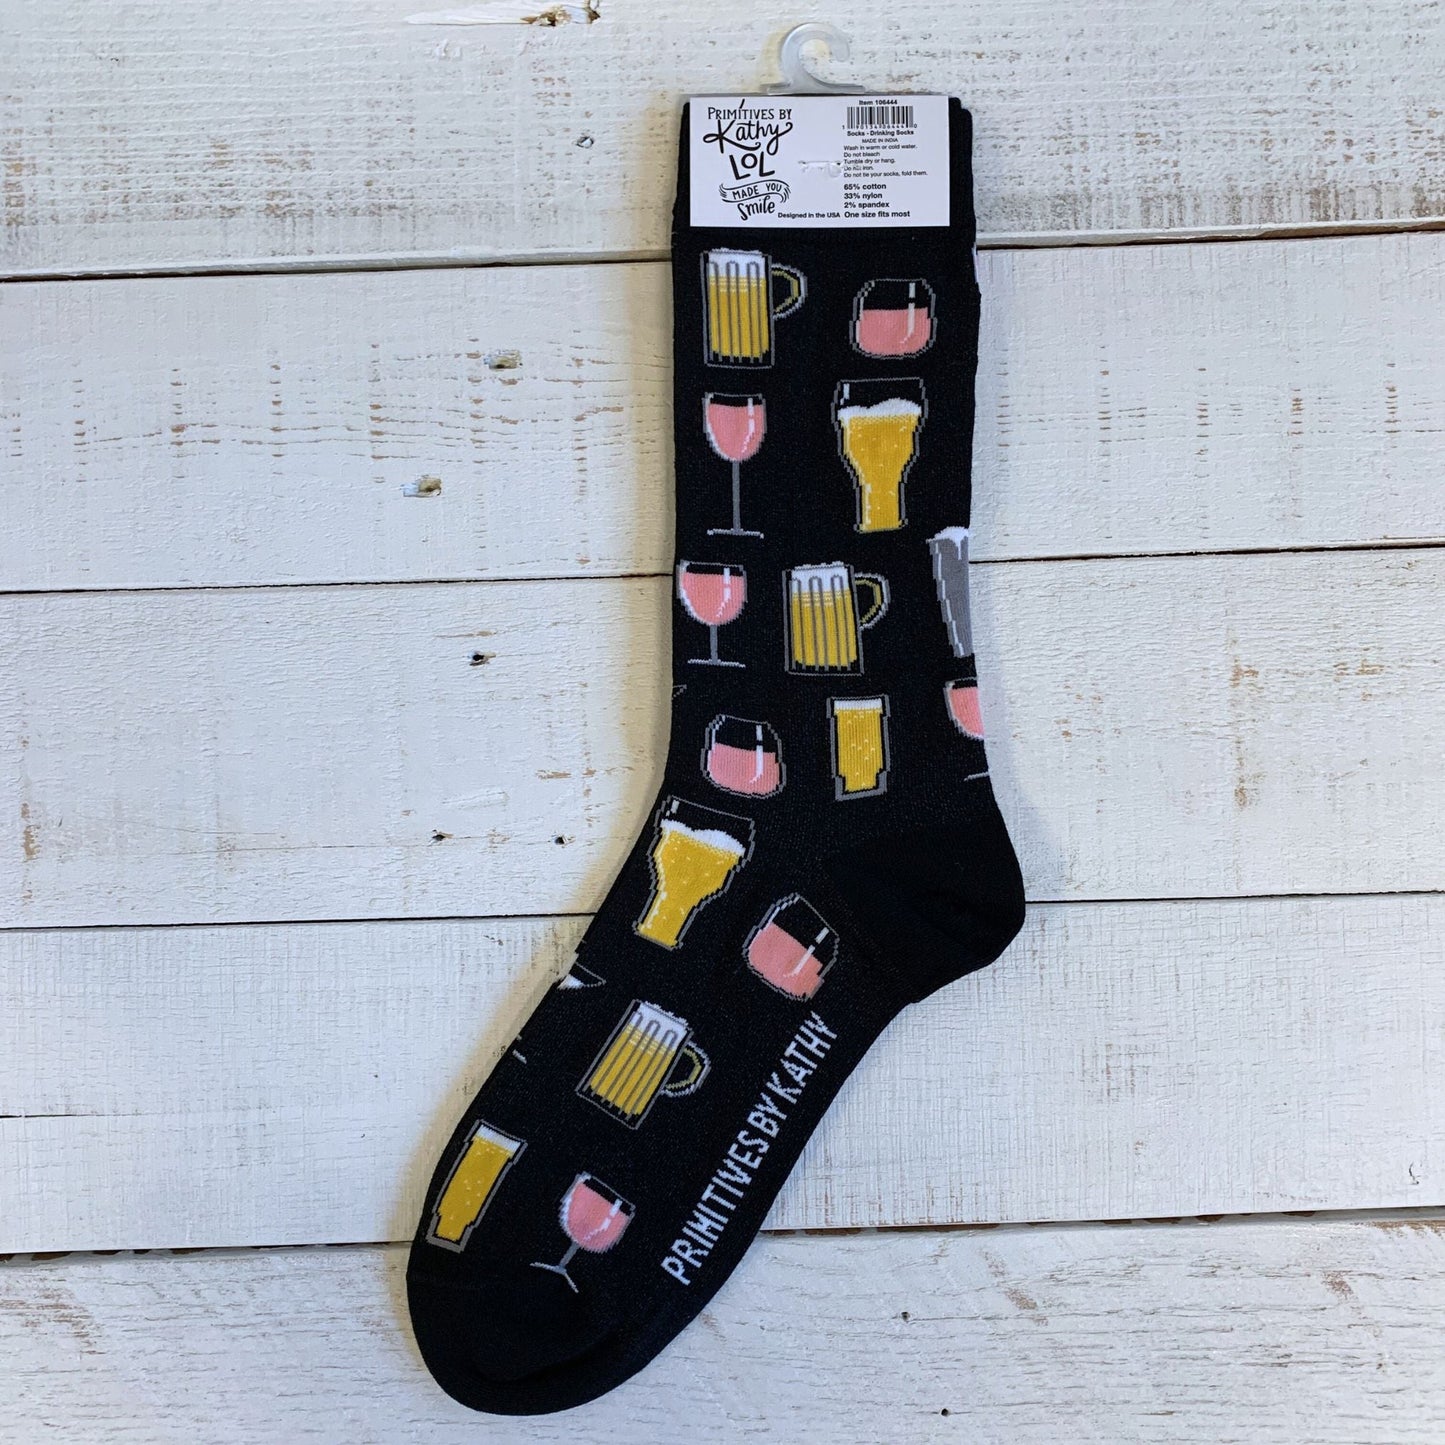 These Are My Drinking Socks Black Colorful Funny Novelty Socks with Cool Design, Bold/Crazy/Unique Specialty Dress Socks